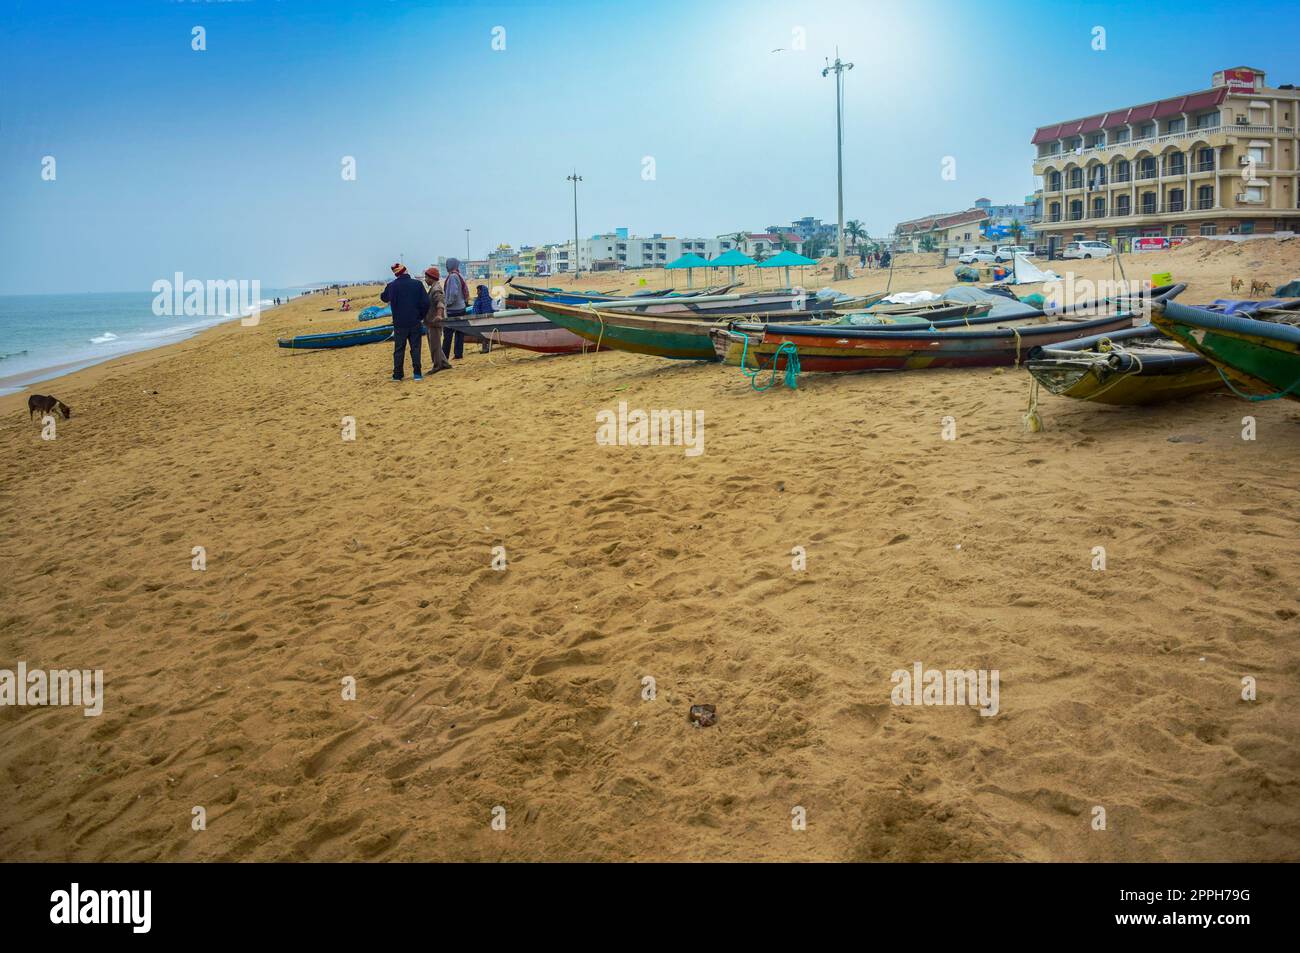 Seashore and Beaches around of India Travelling and tour ot PURI an age old renound city, beach resort in the beach of bay of Bengal, Odisa, India, very popular in eastern India. FEBRUARY 2020. Stock Photo